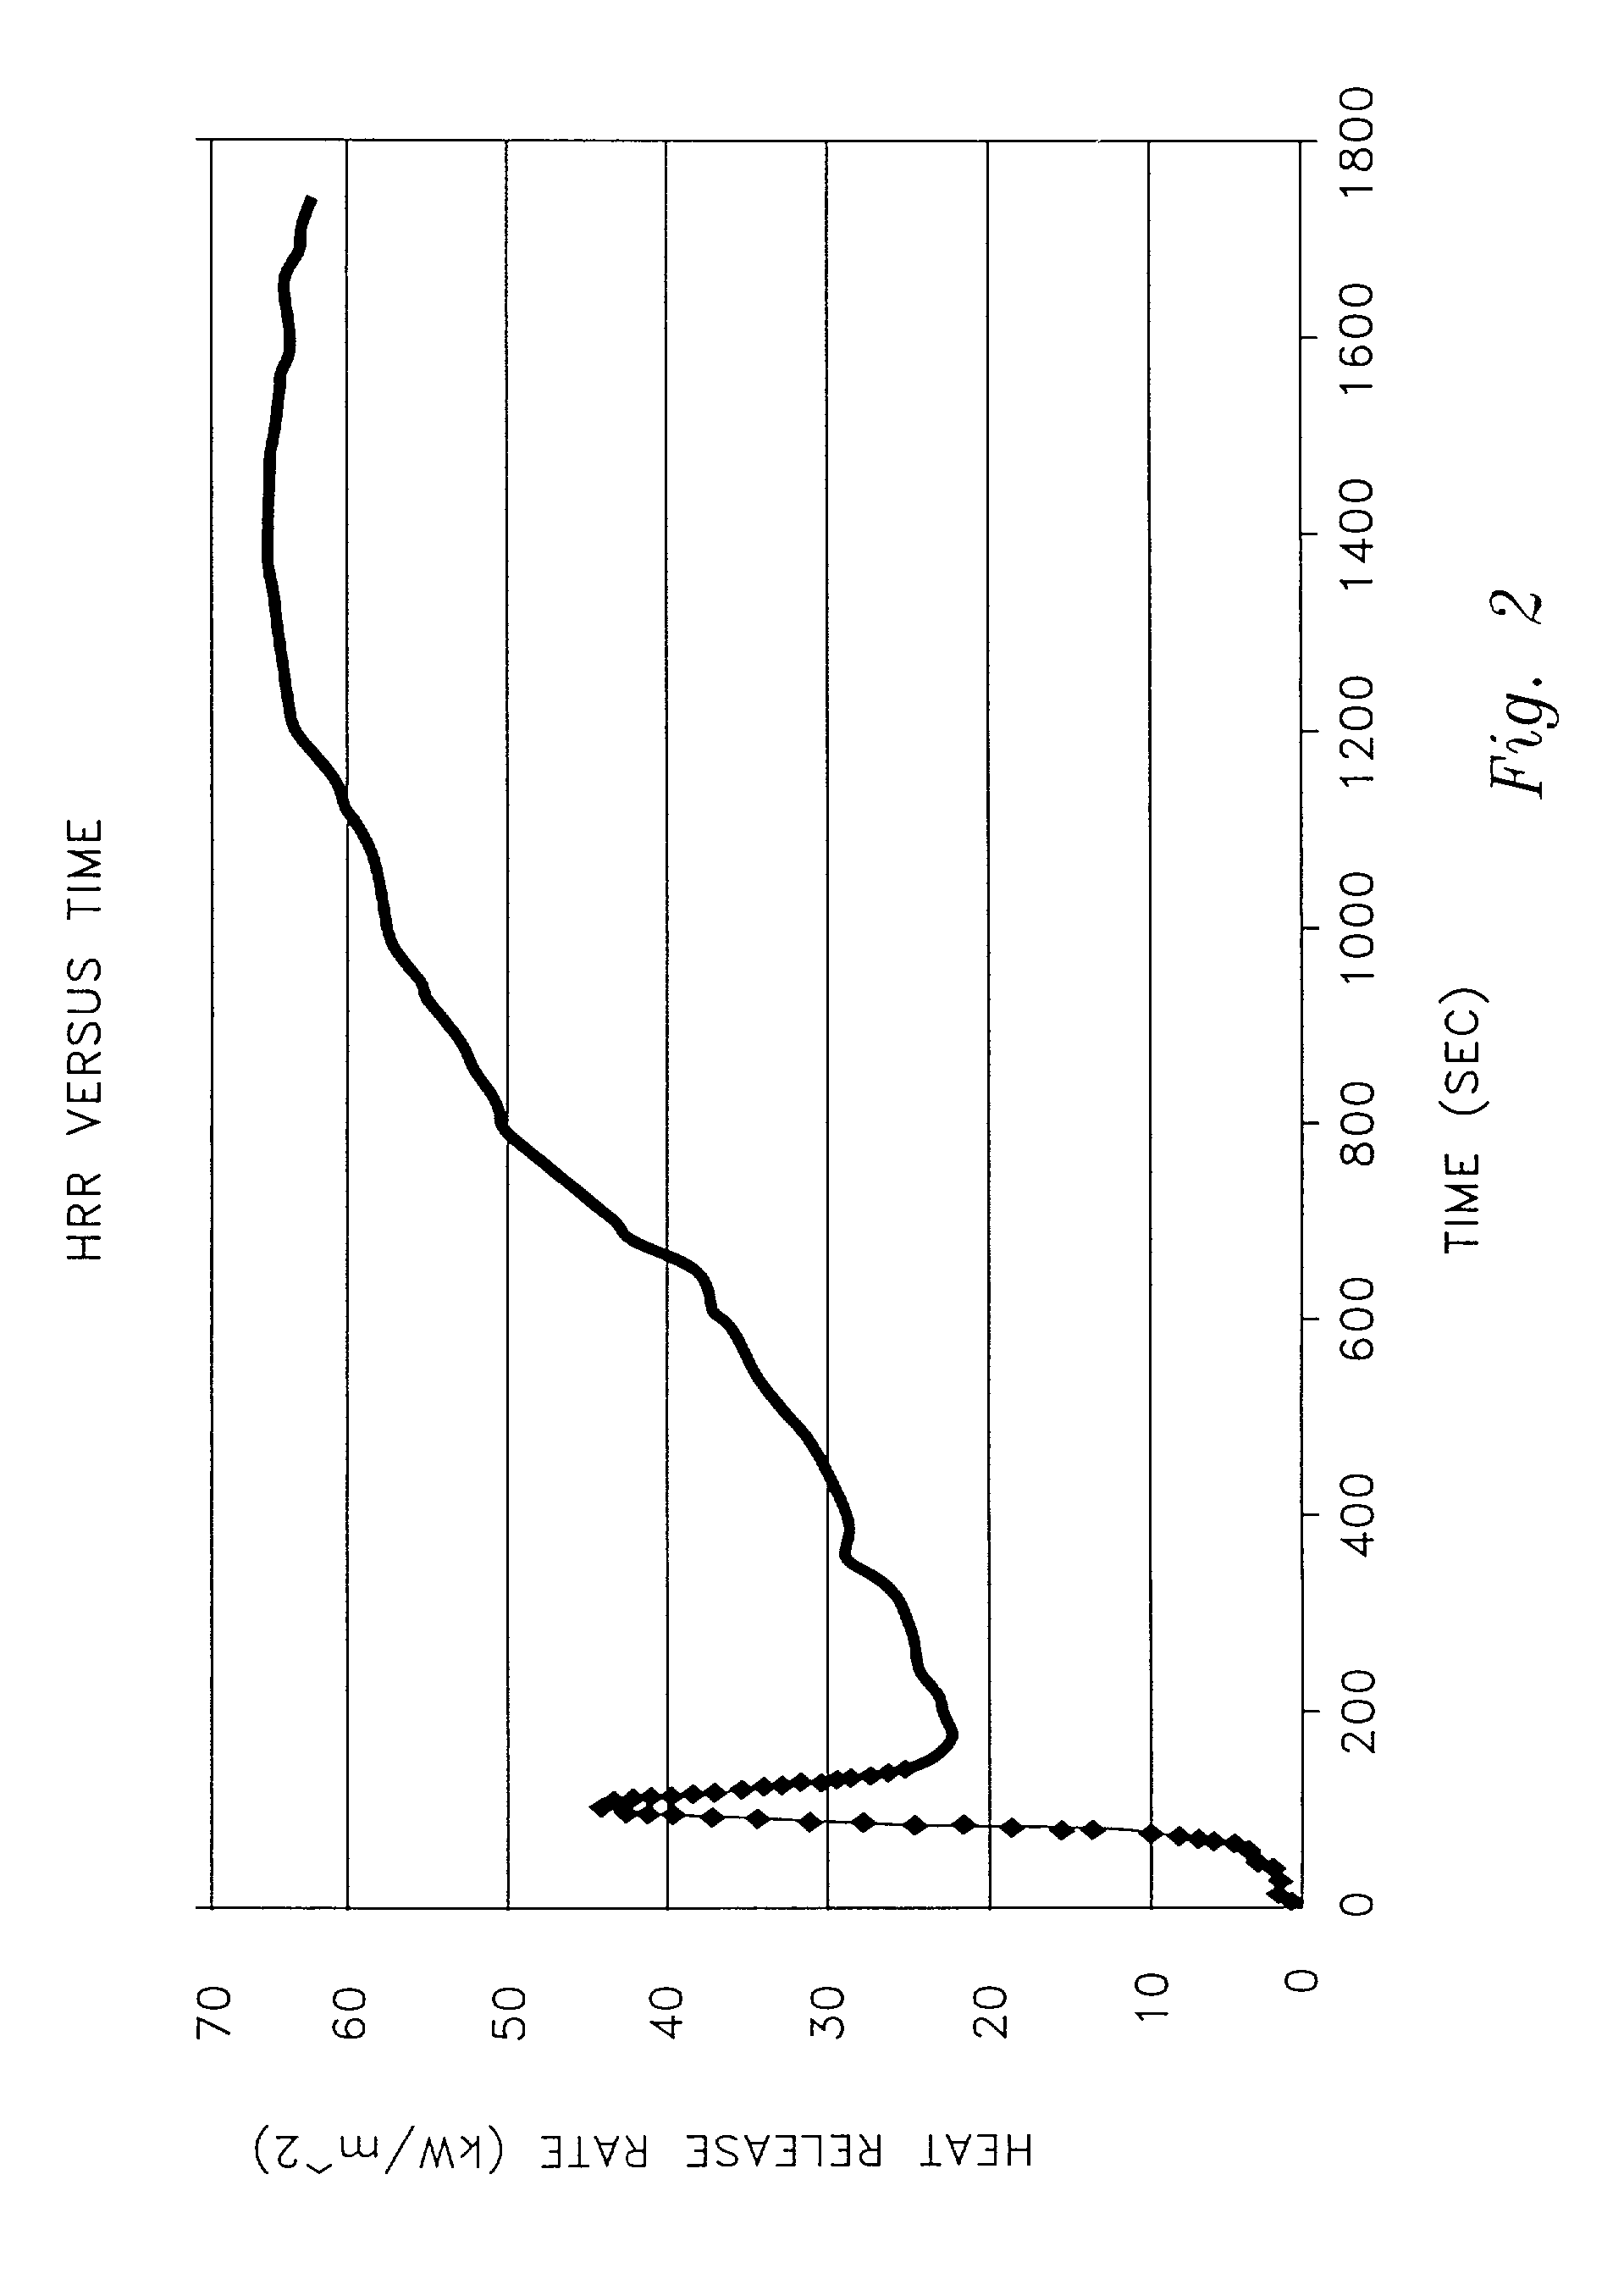 Combustible fuel composition and method